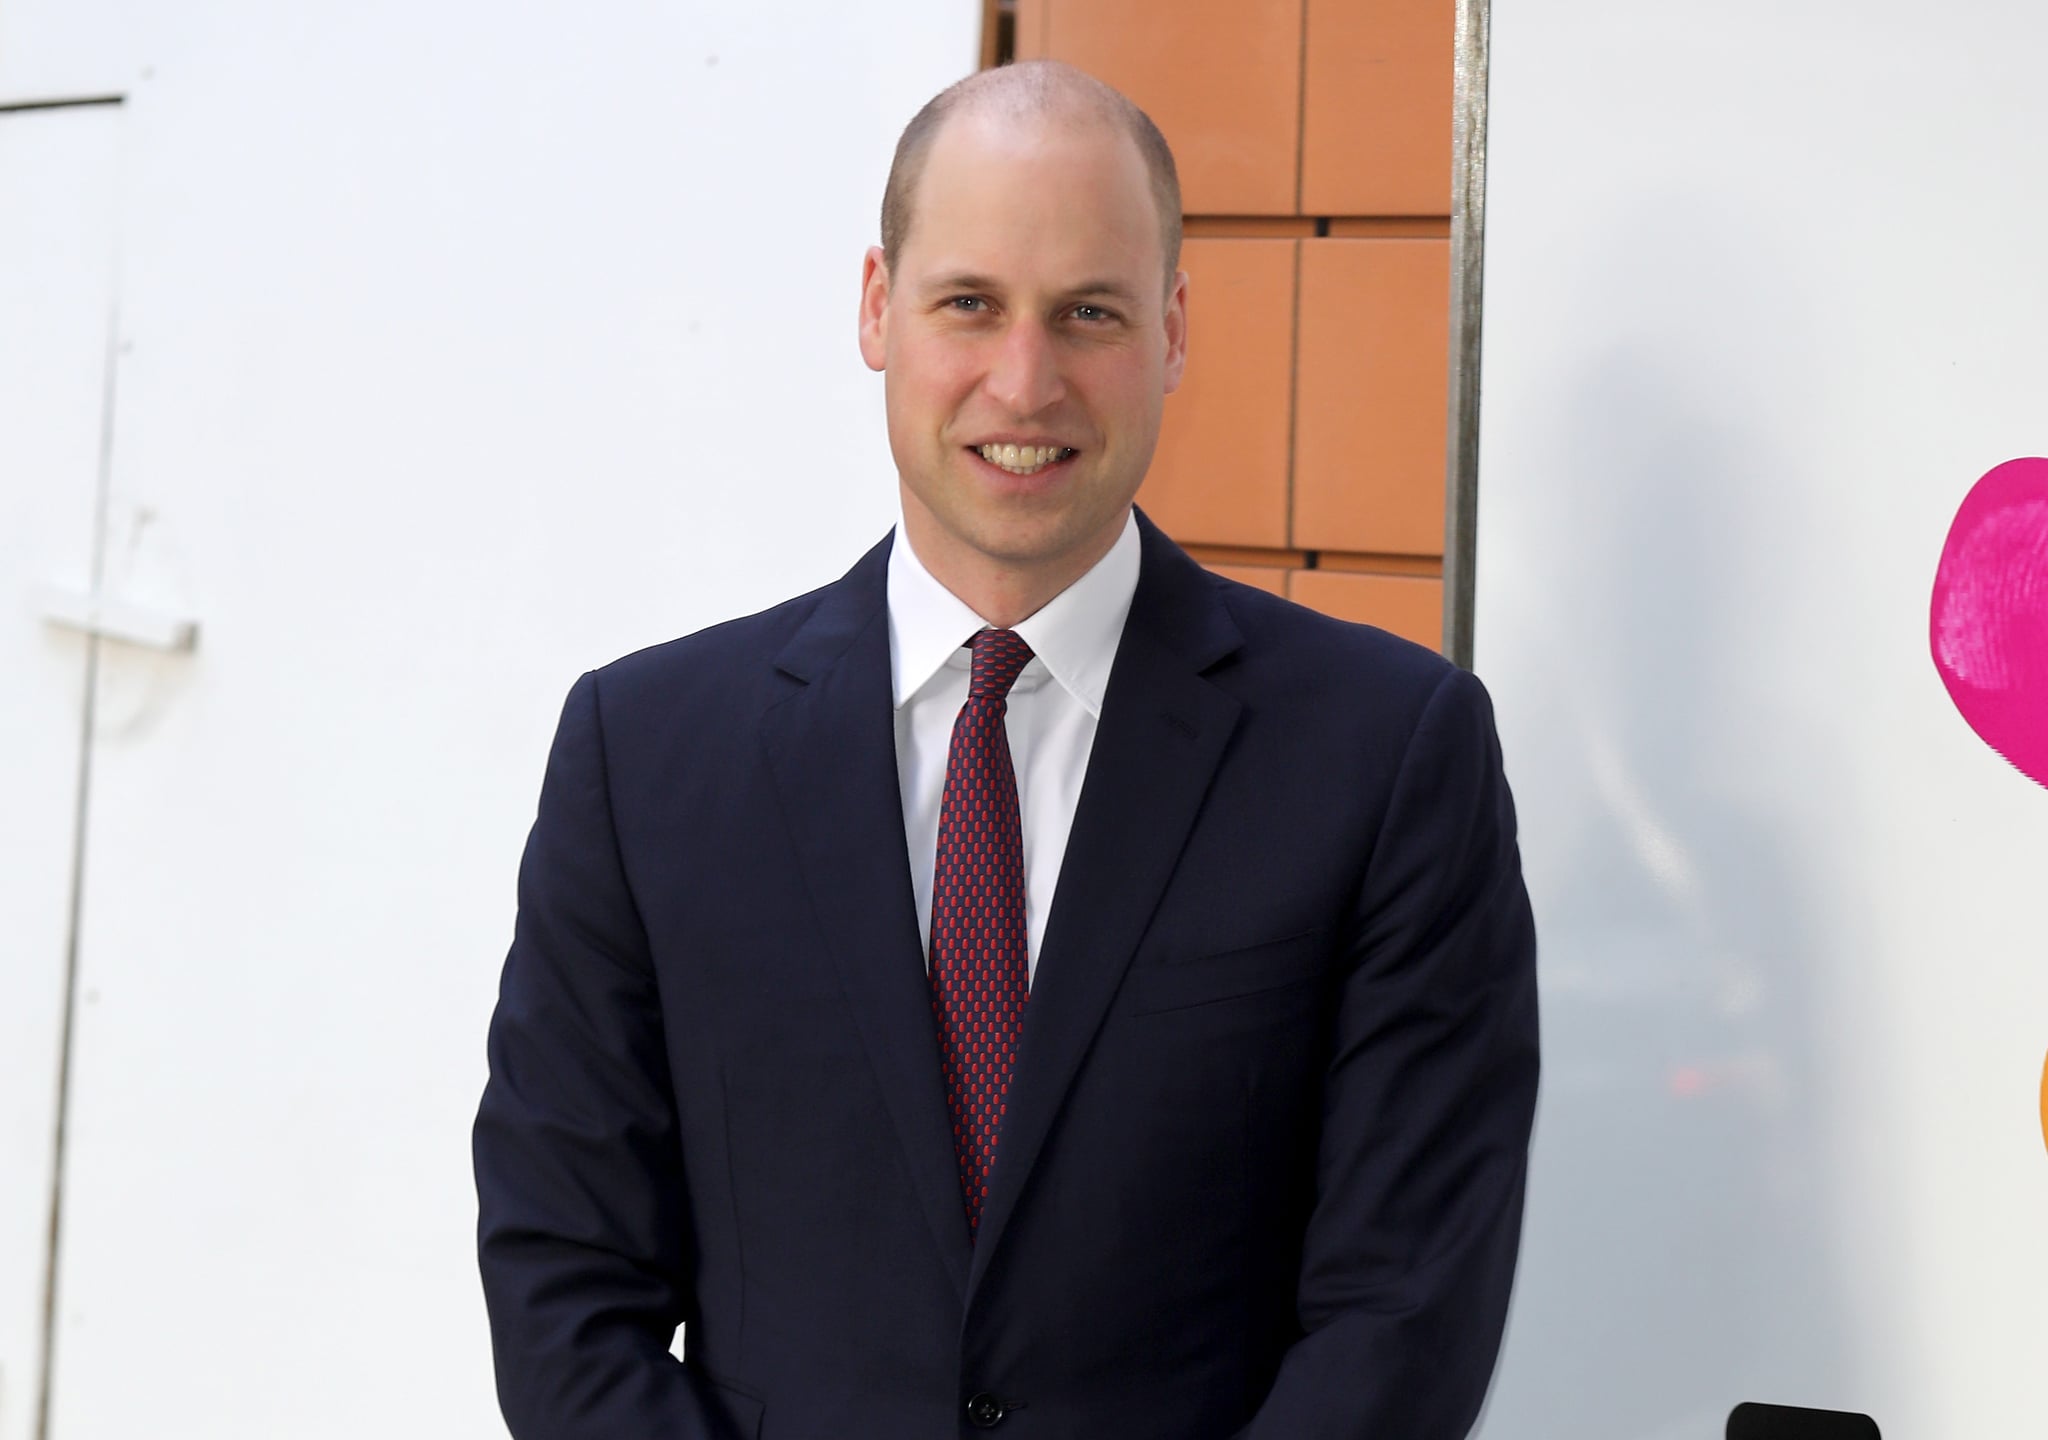 Prince William says being a dad to 2 kids is exhausting